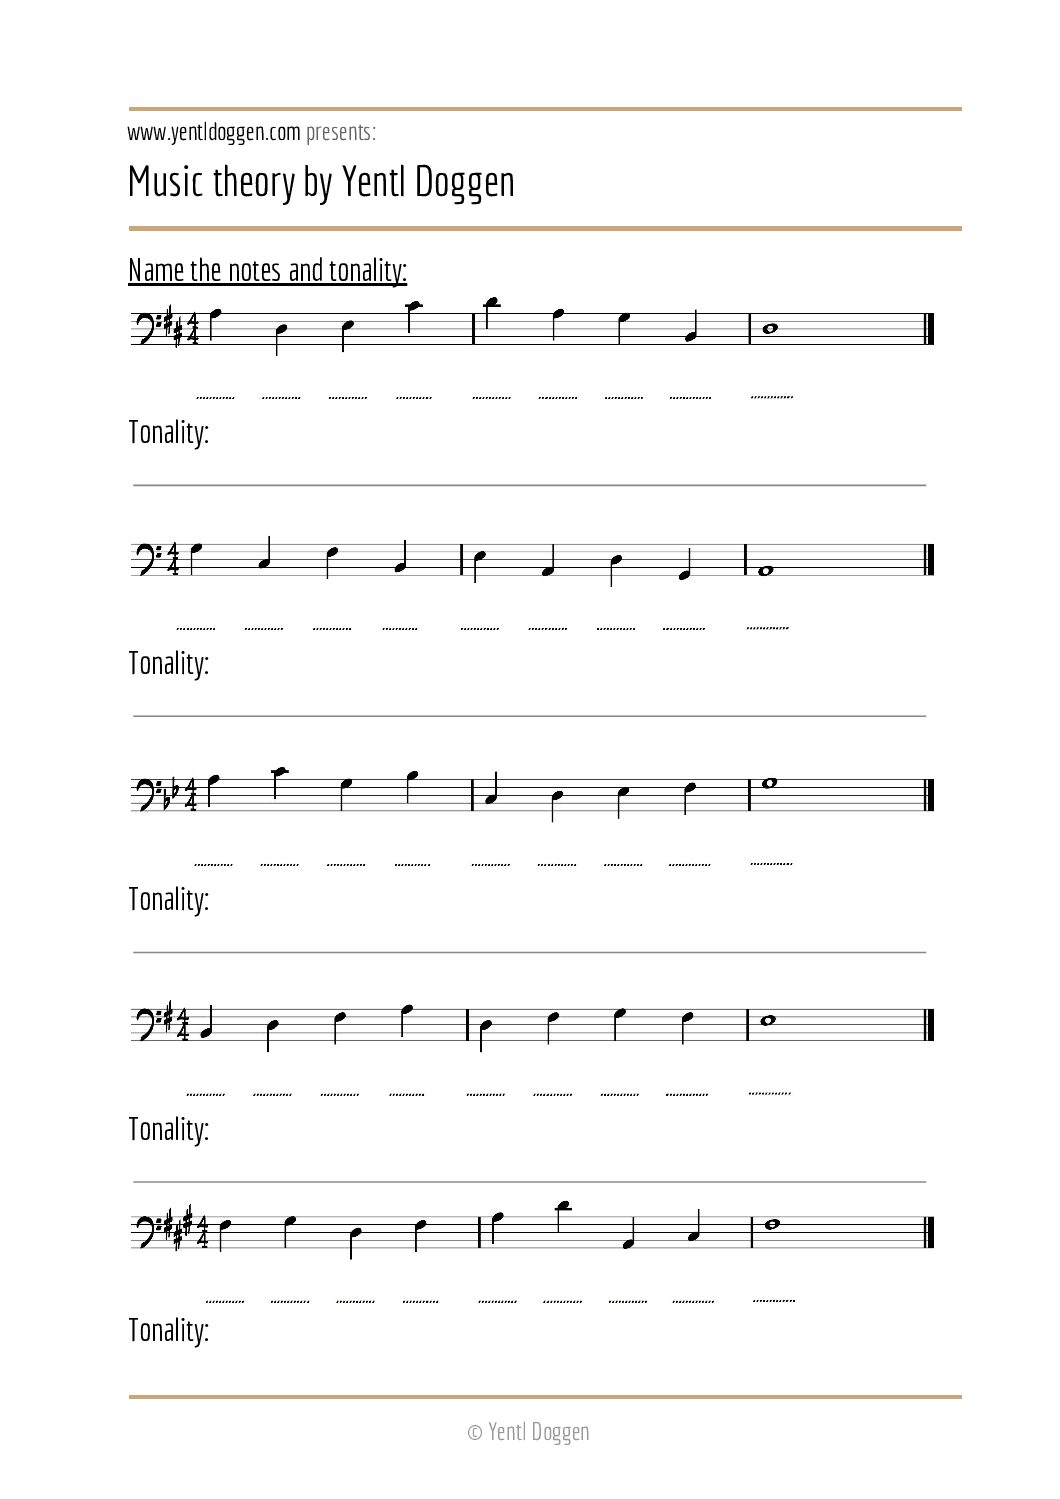 PDF for the intermediate music  theory exercises 